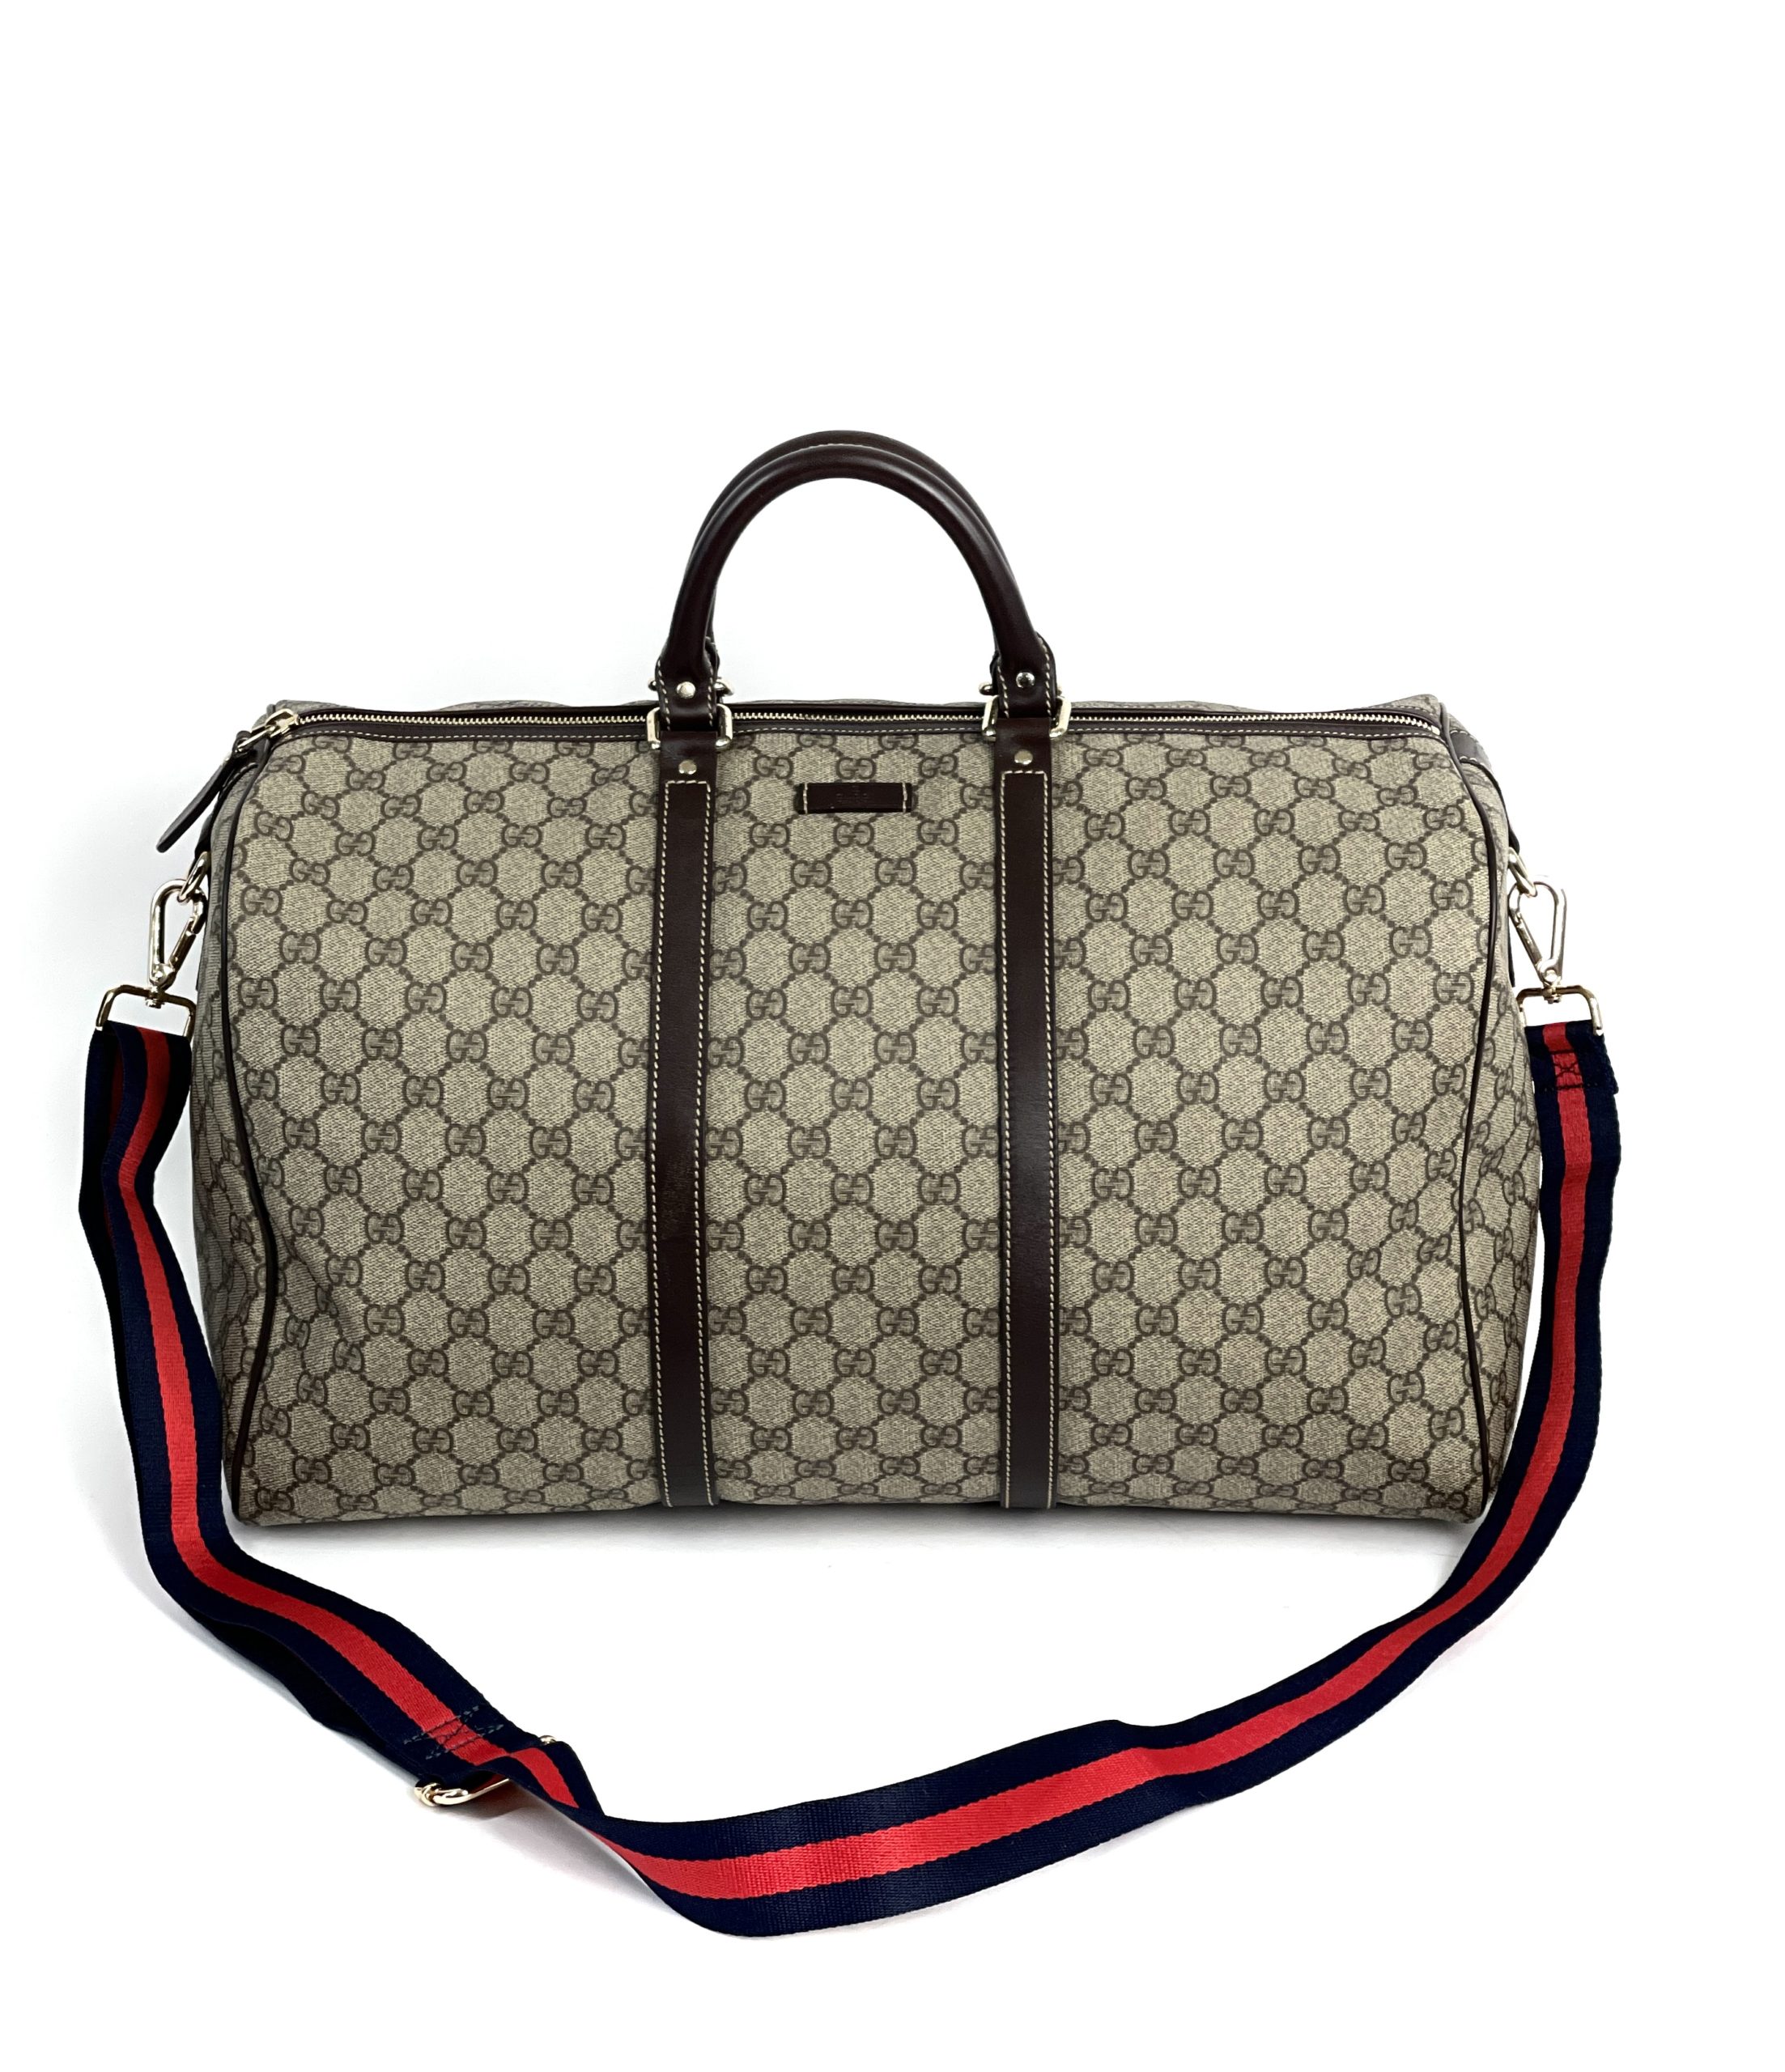 Gucci Leather- and Webbing-Trimmed Monogrammed Supreme Coated-canvas Holdall - Beige